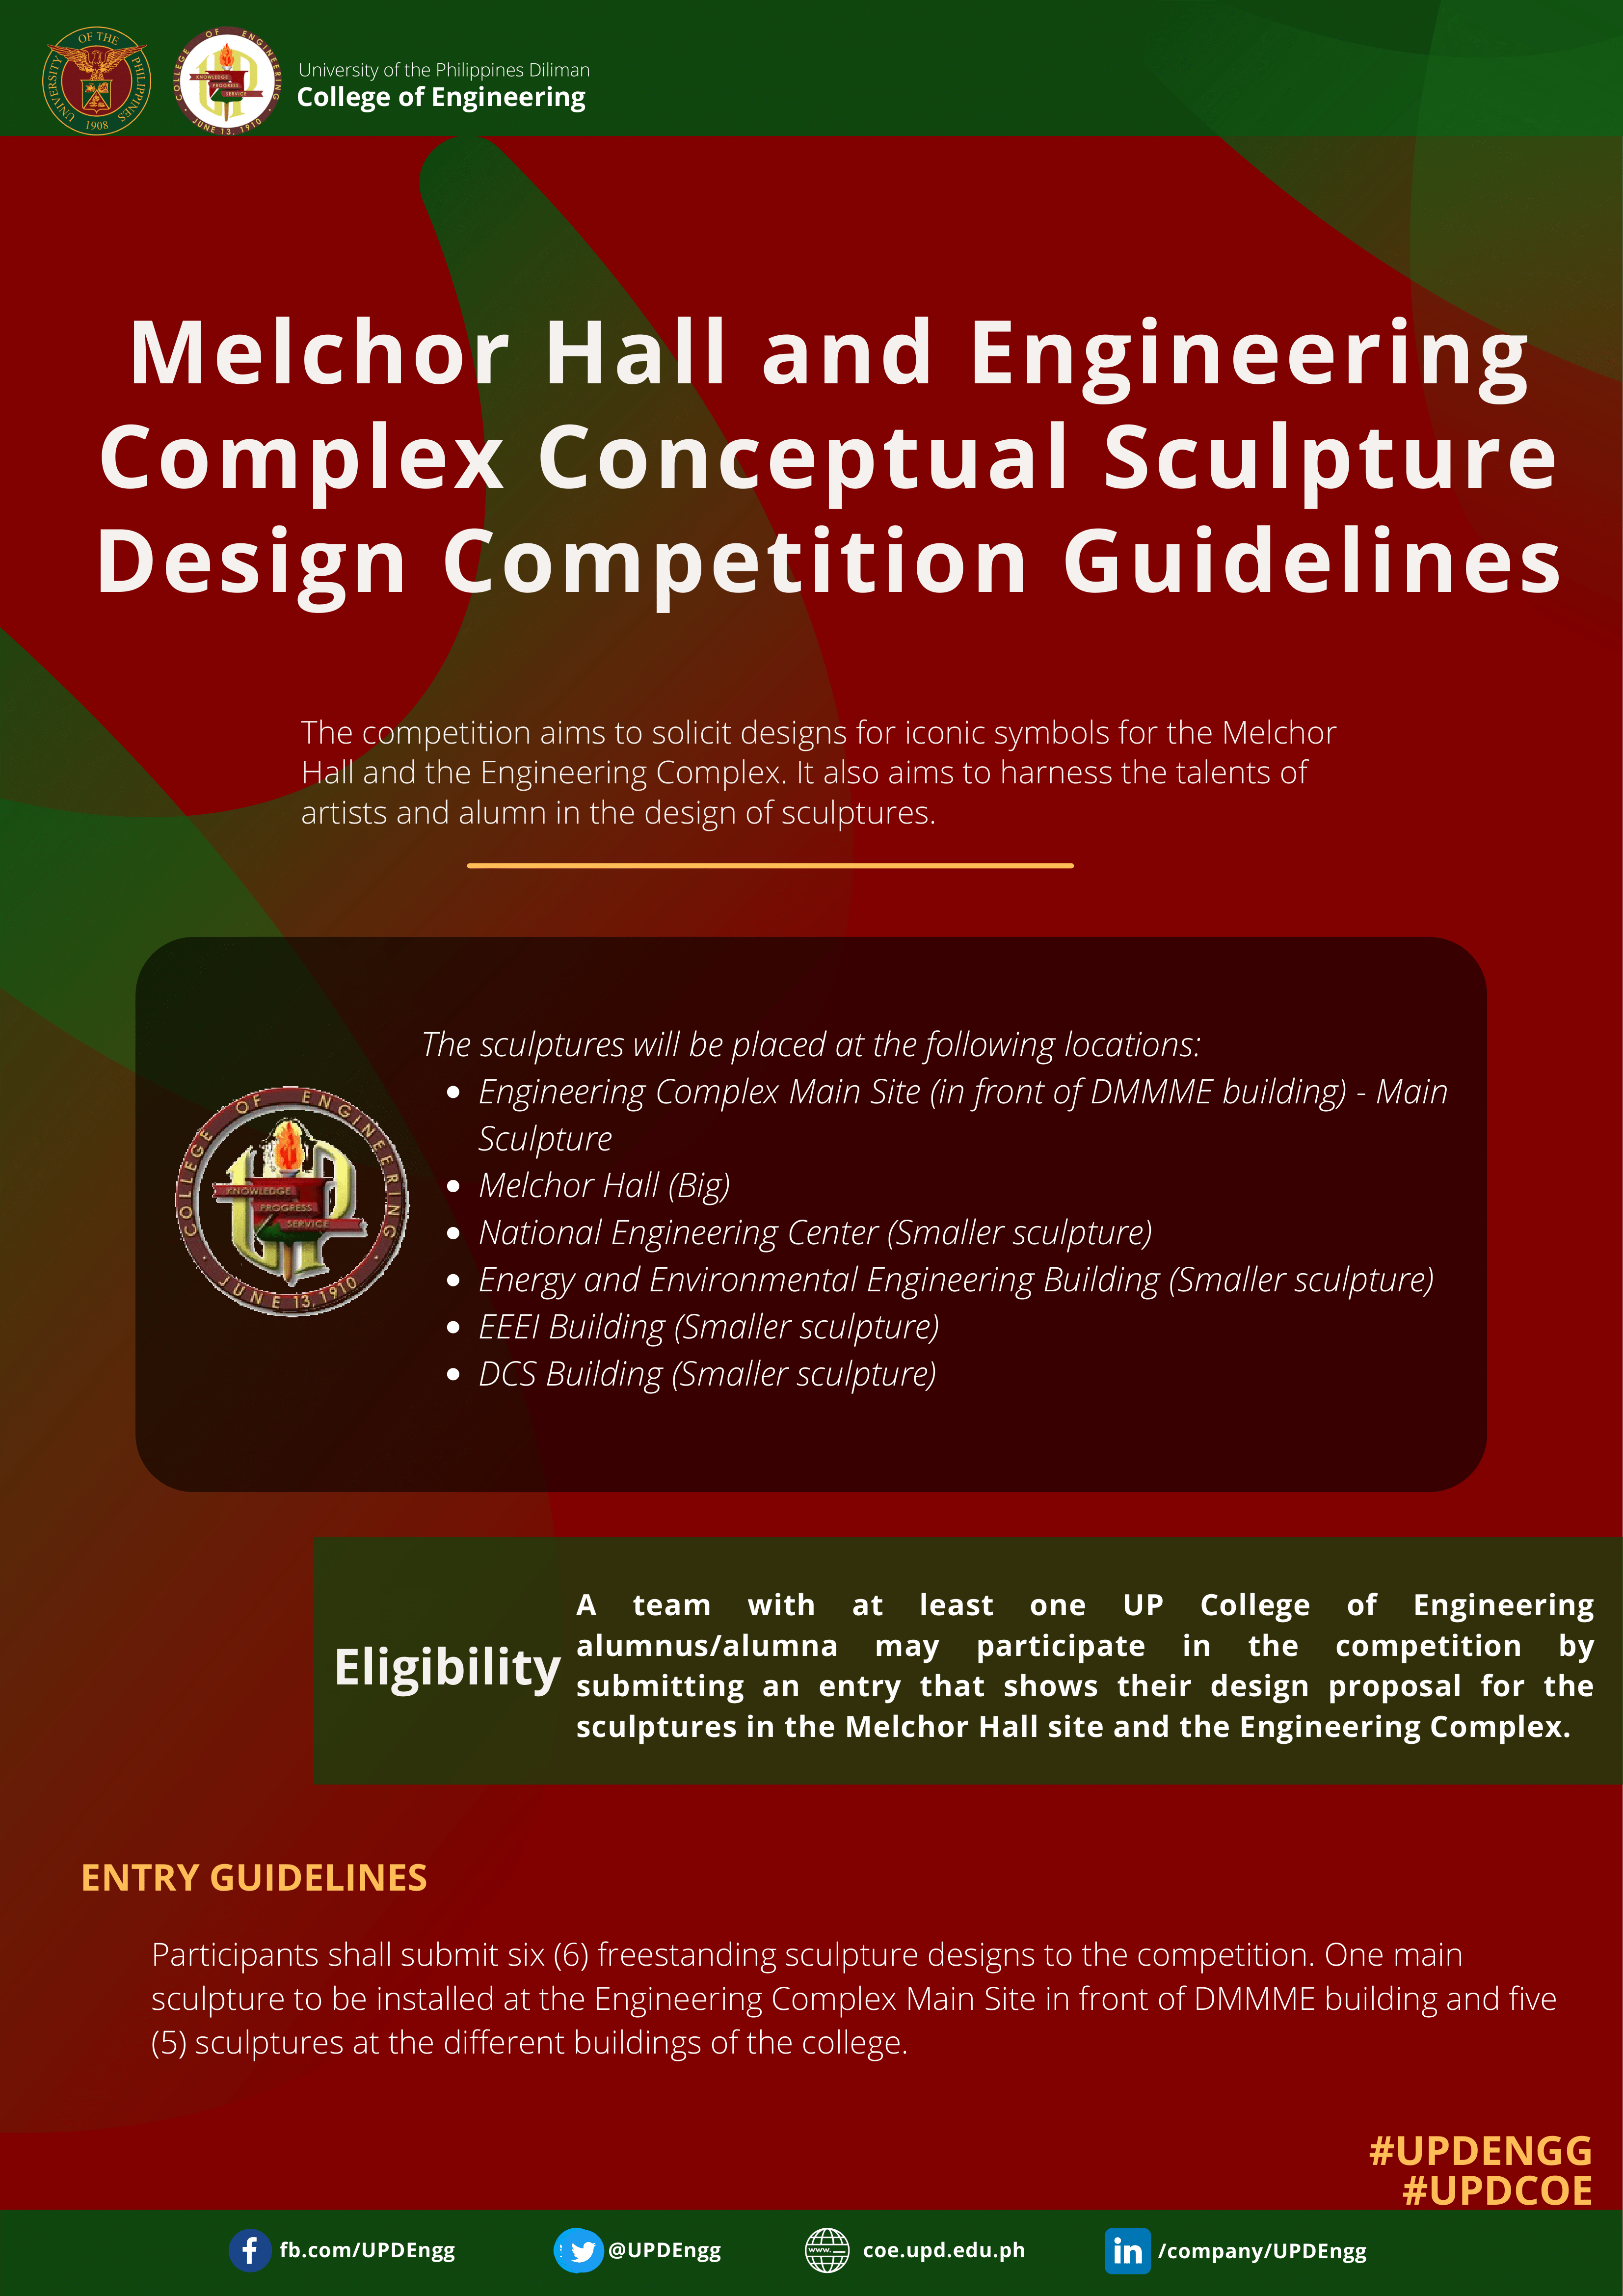 UPD COE launches the Melchor Hall and Engineering Complex Conceptual Sculpture Design Competition